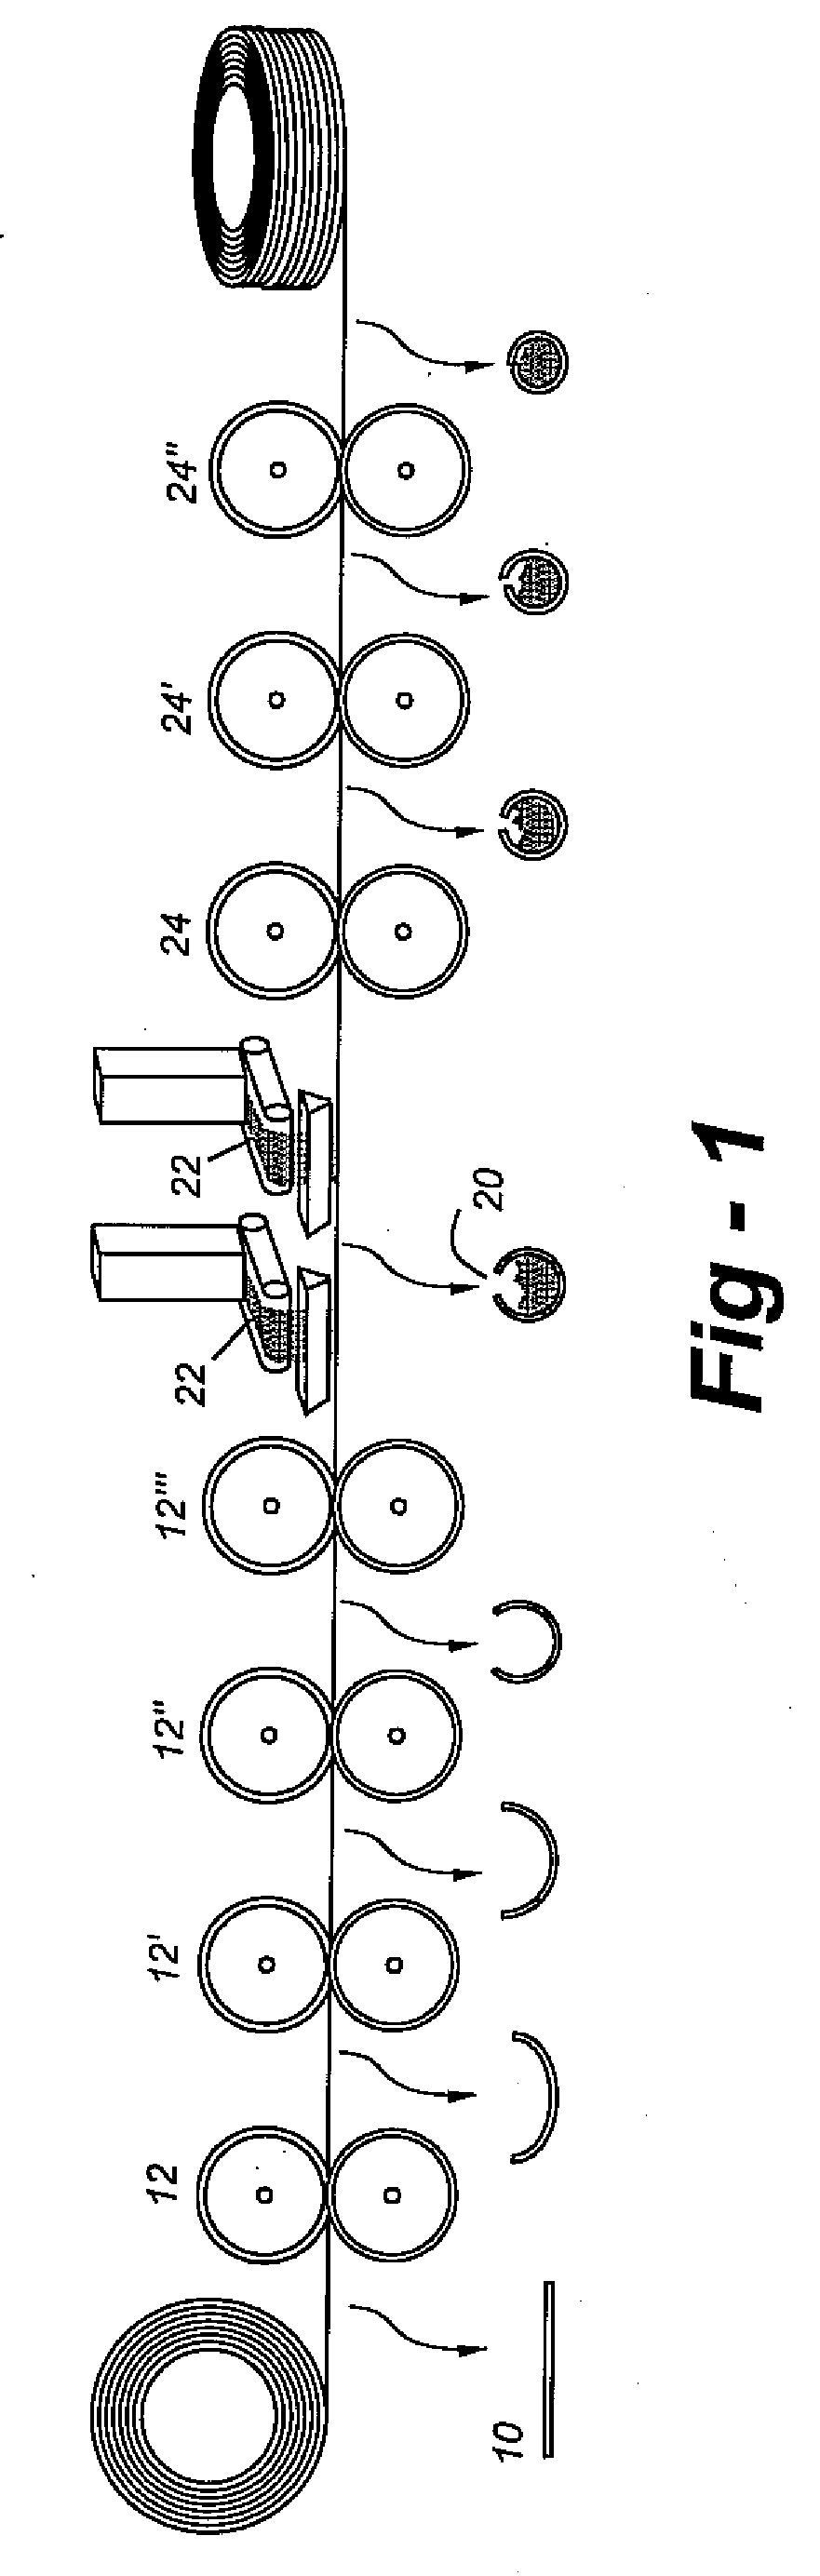 Simplified method and apparatus for making cored wire and other tubular products